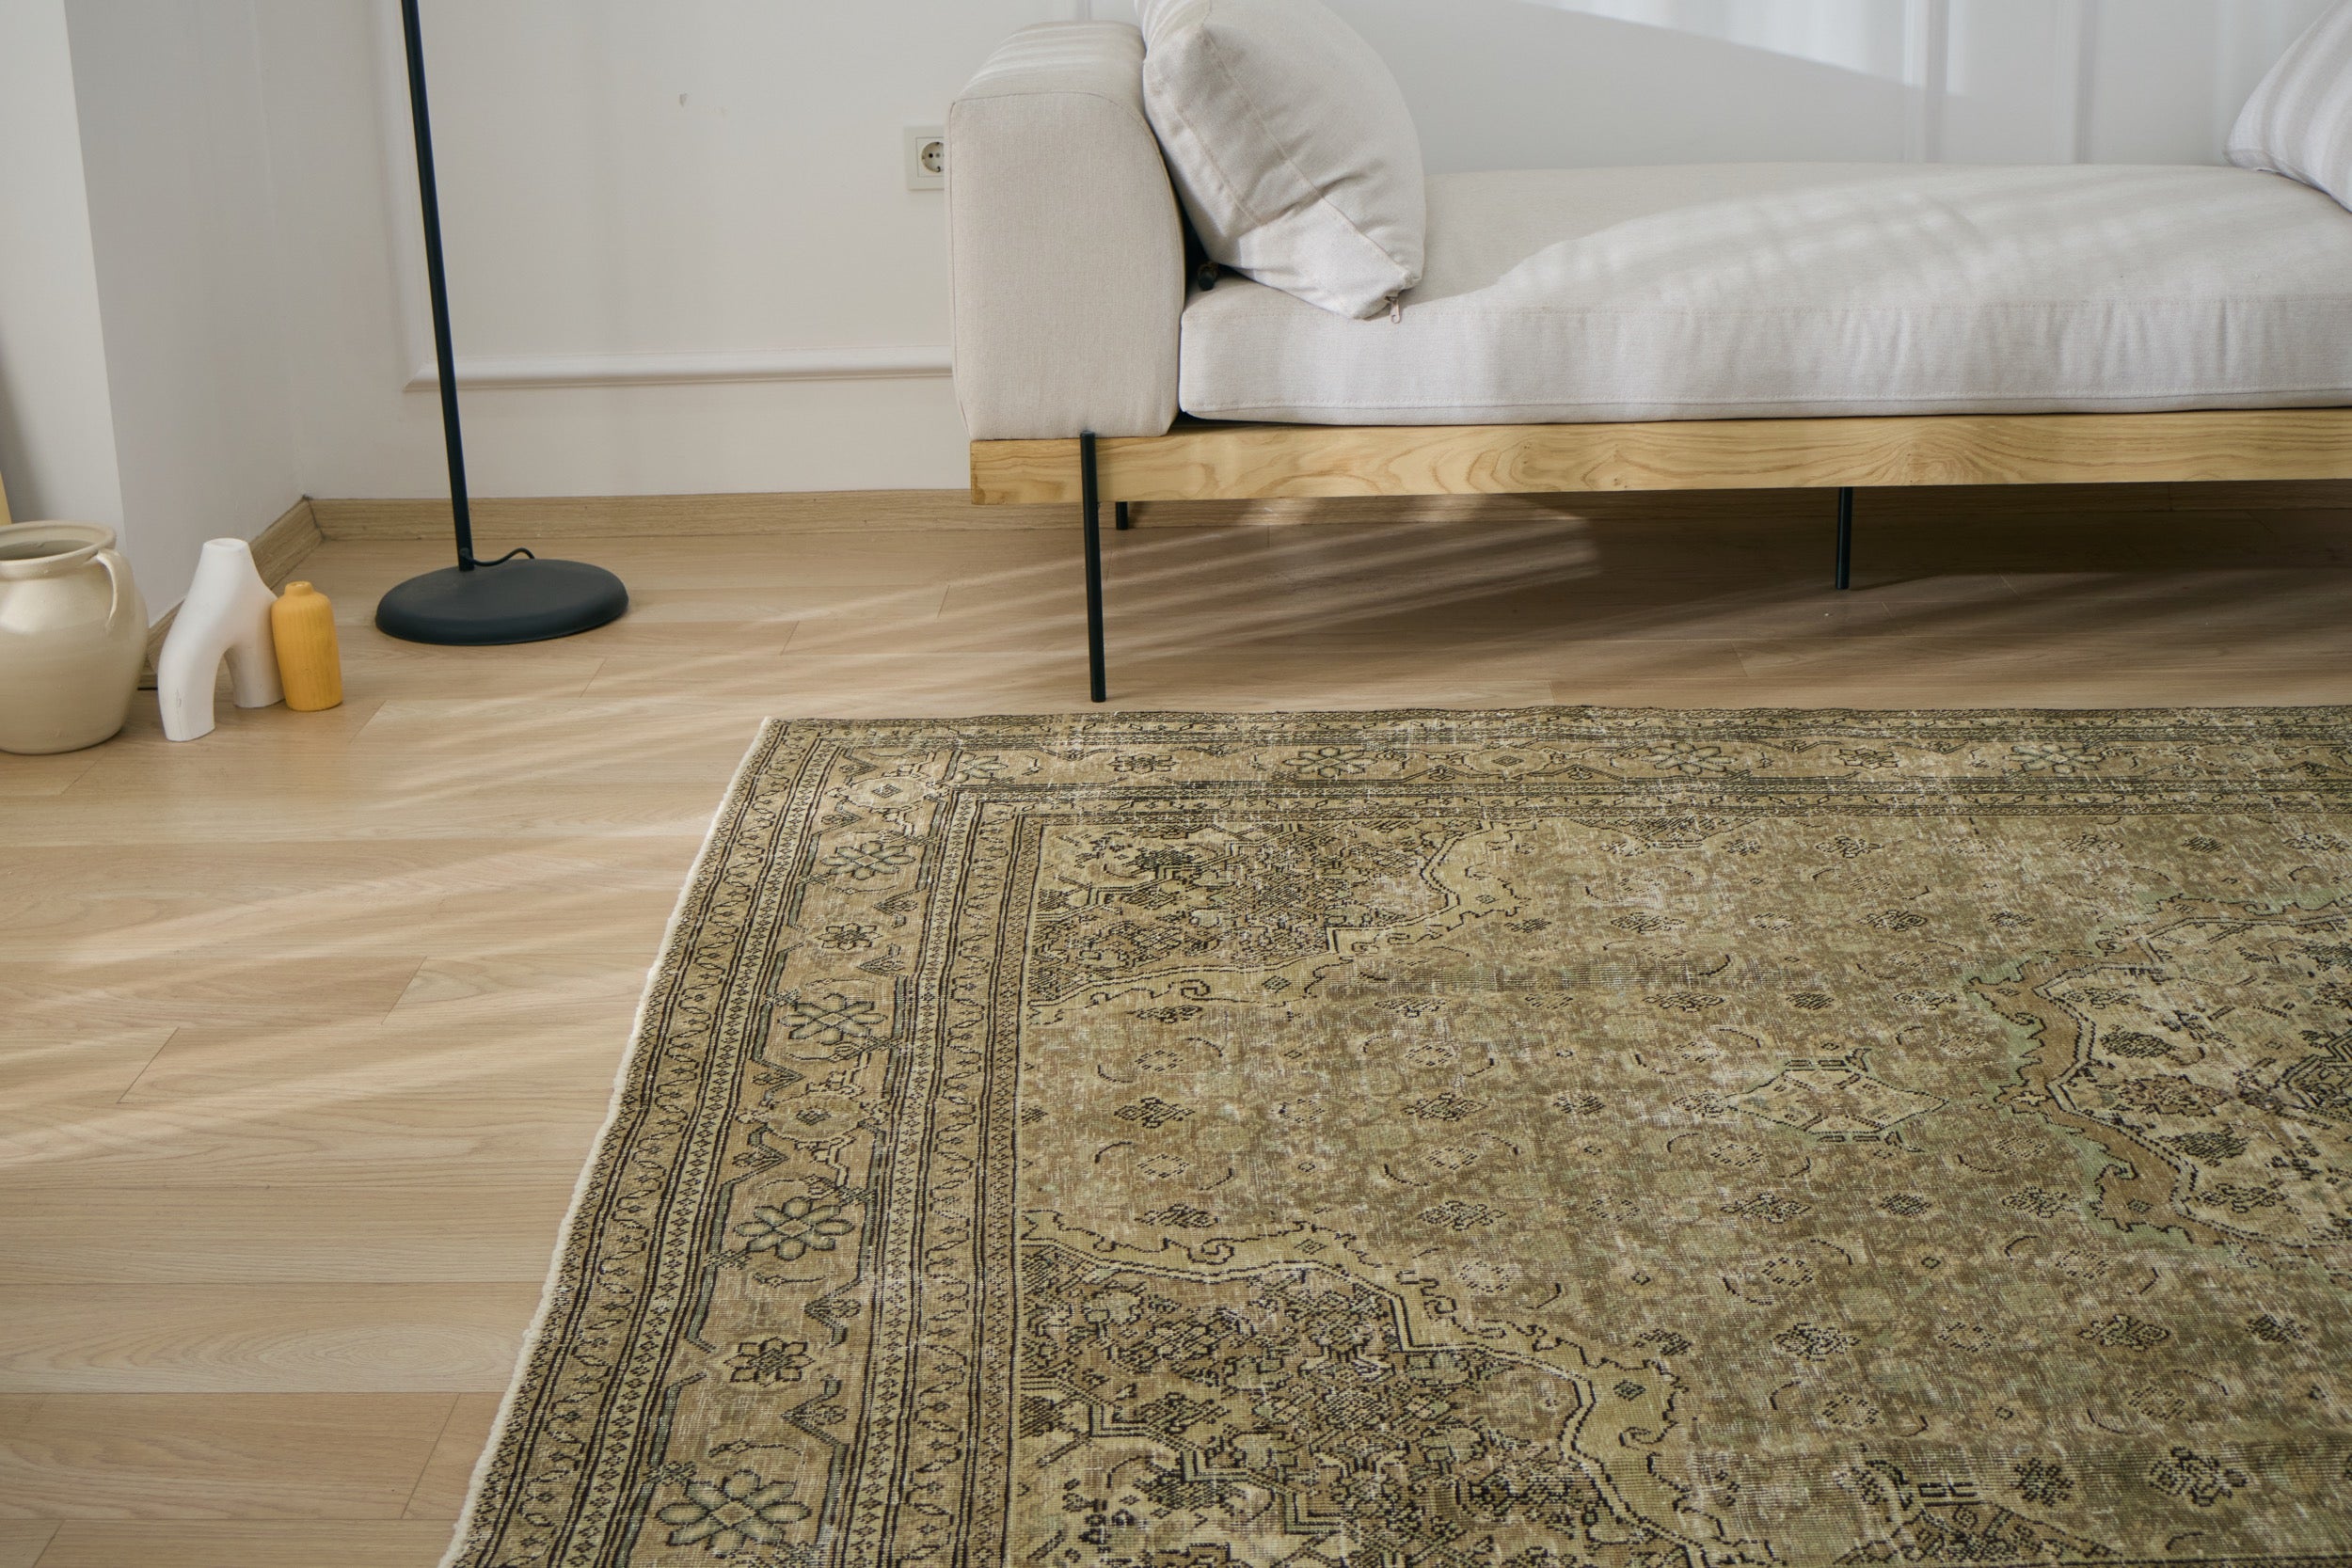 Shoshanna - Crafting Comfort, One Knot at a Time | Kuden Rugs